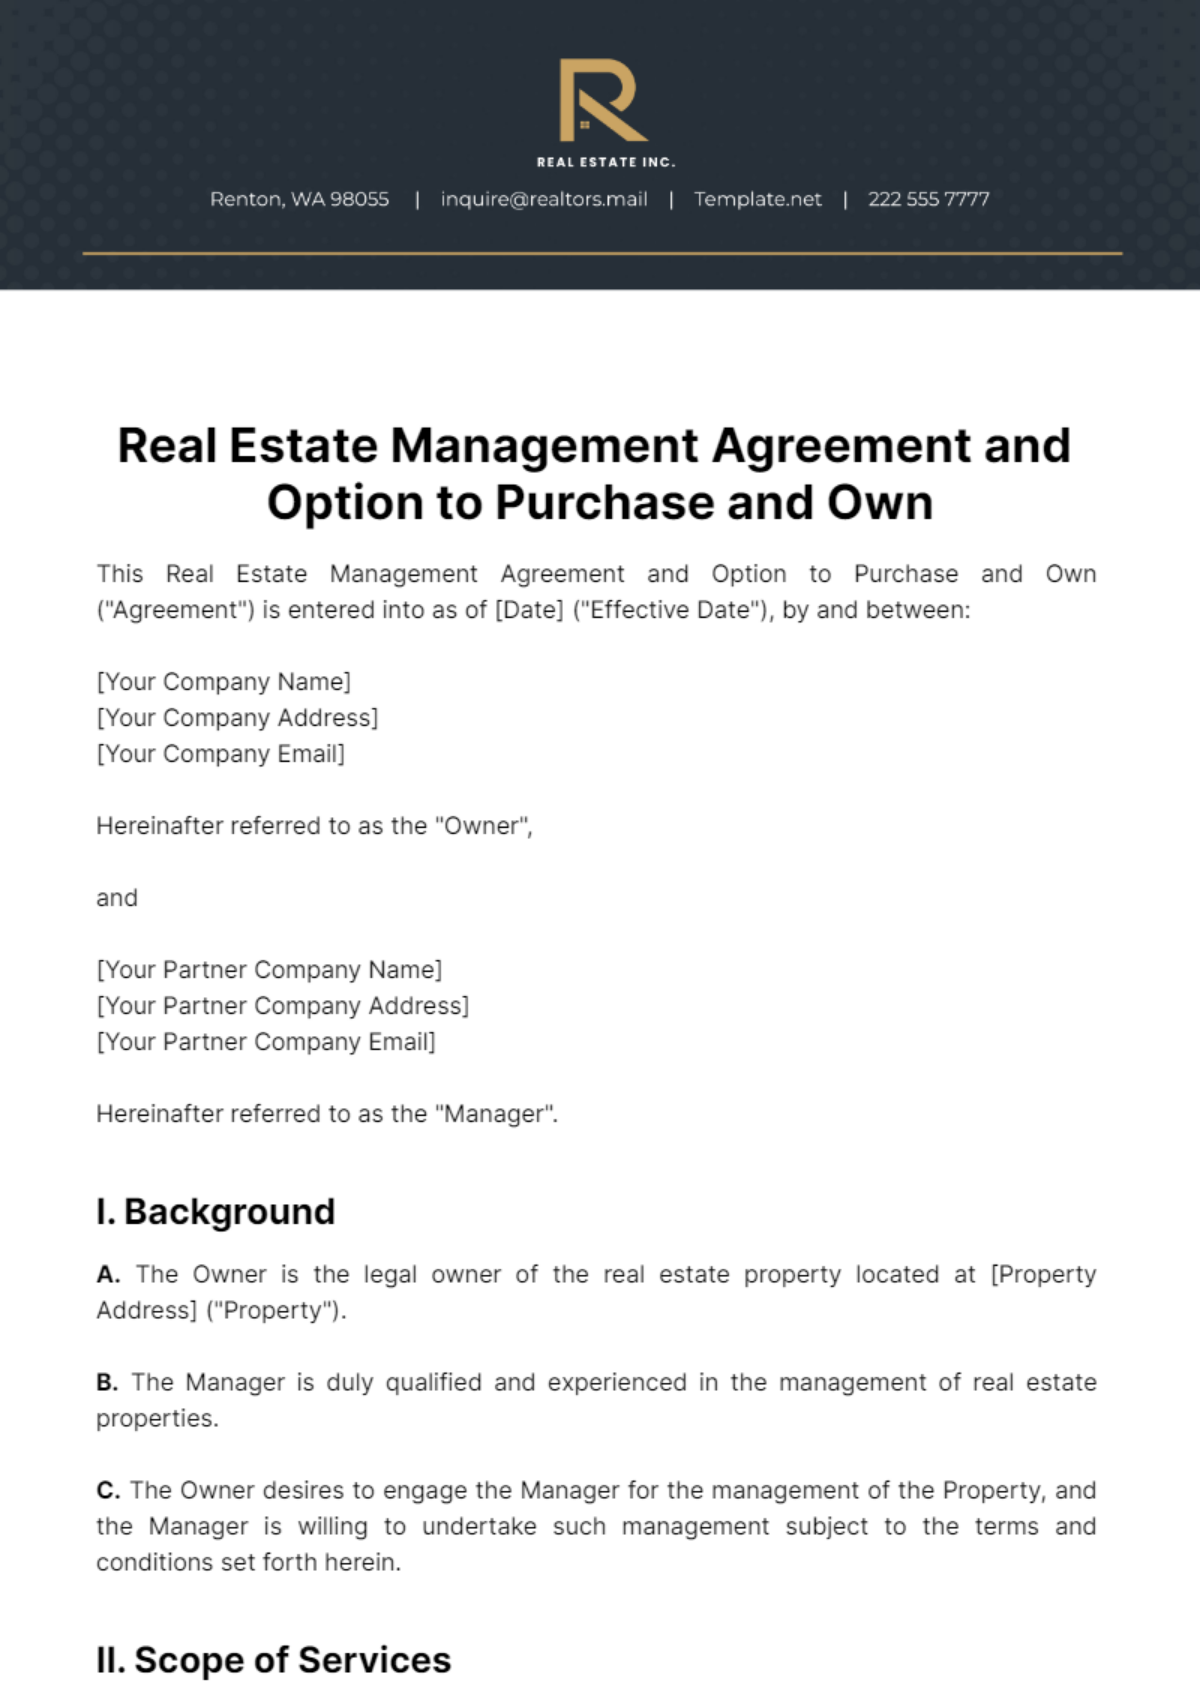 Real Estate Management Agreement and Option to Purchase and Own Template